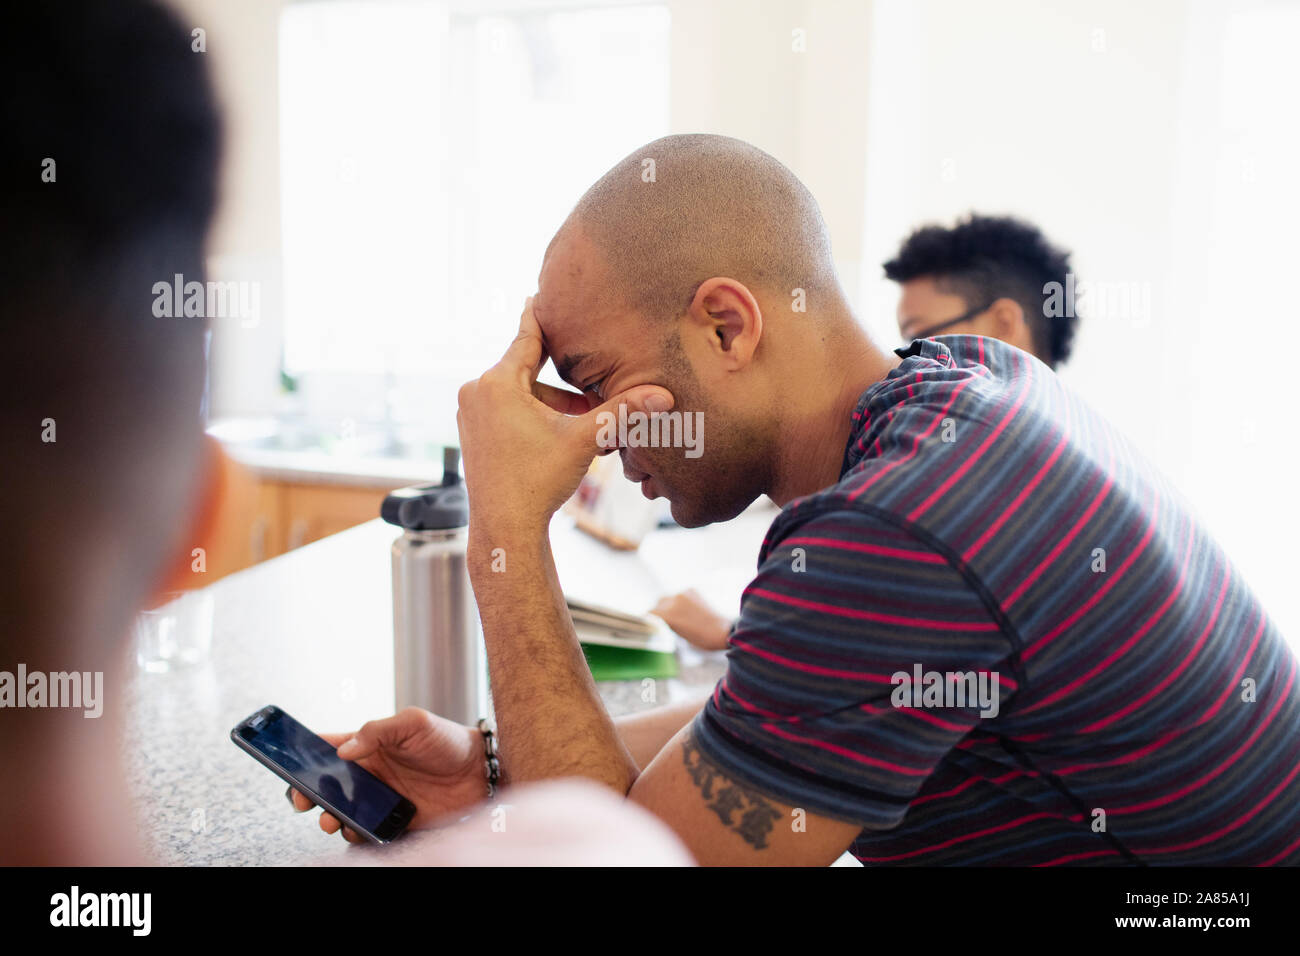 Man with head in hands using smart phone Banque D'Images